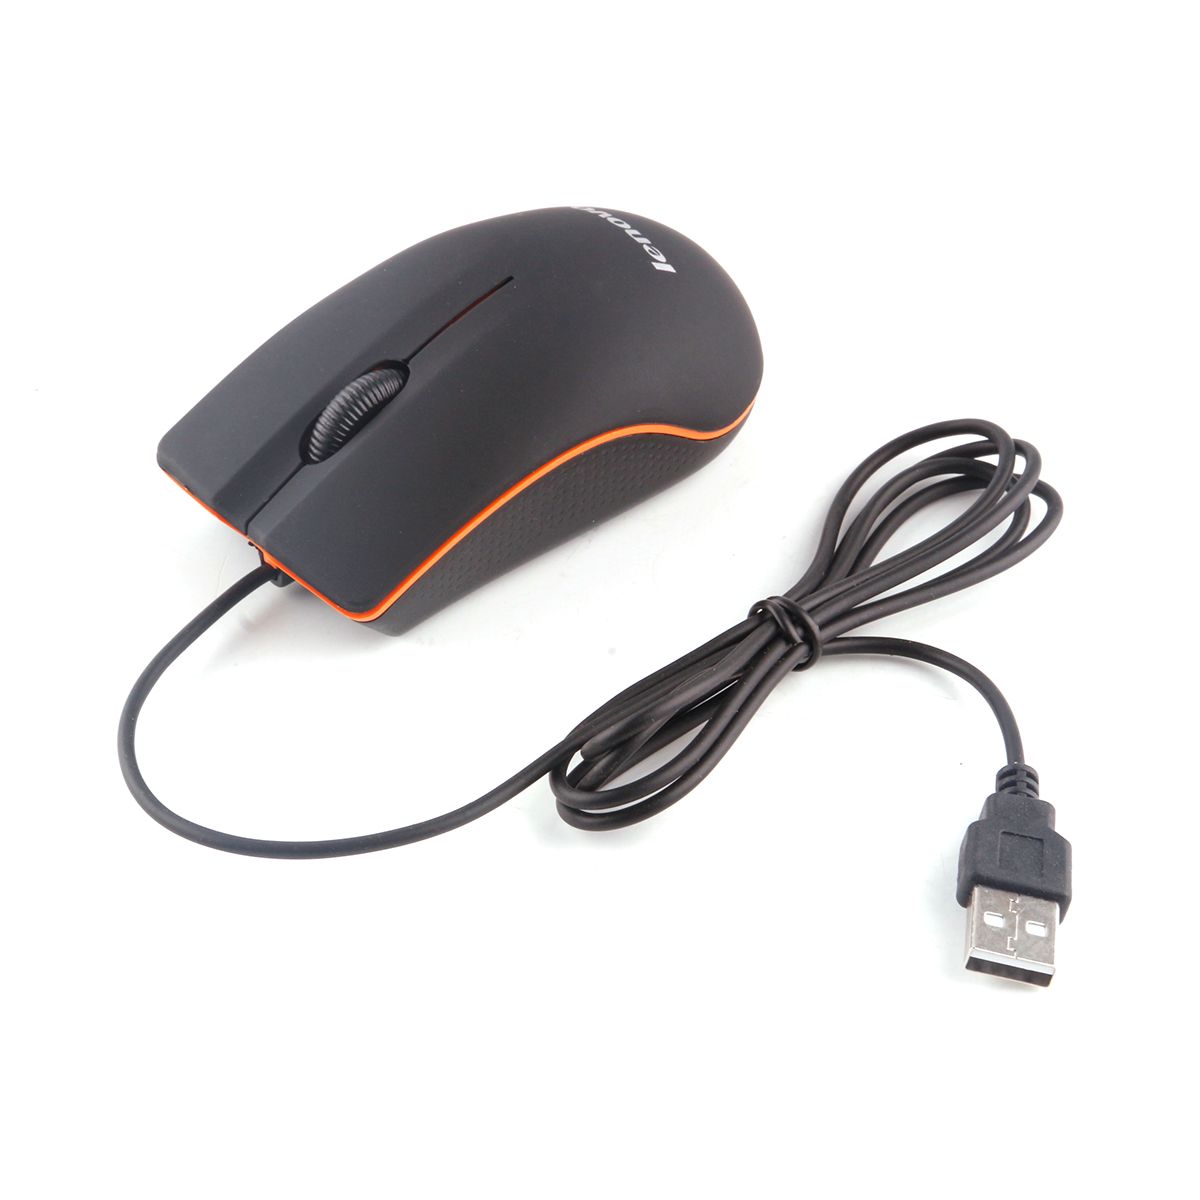 USB 3D Wired Optical Mini Mouse Mice For PC Laptop Lenovo Computers Windows UK 